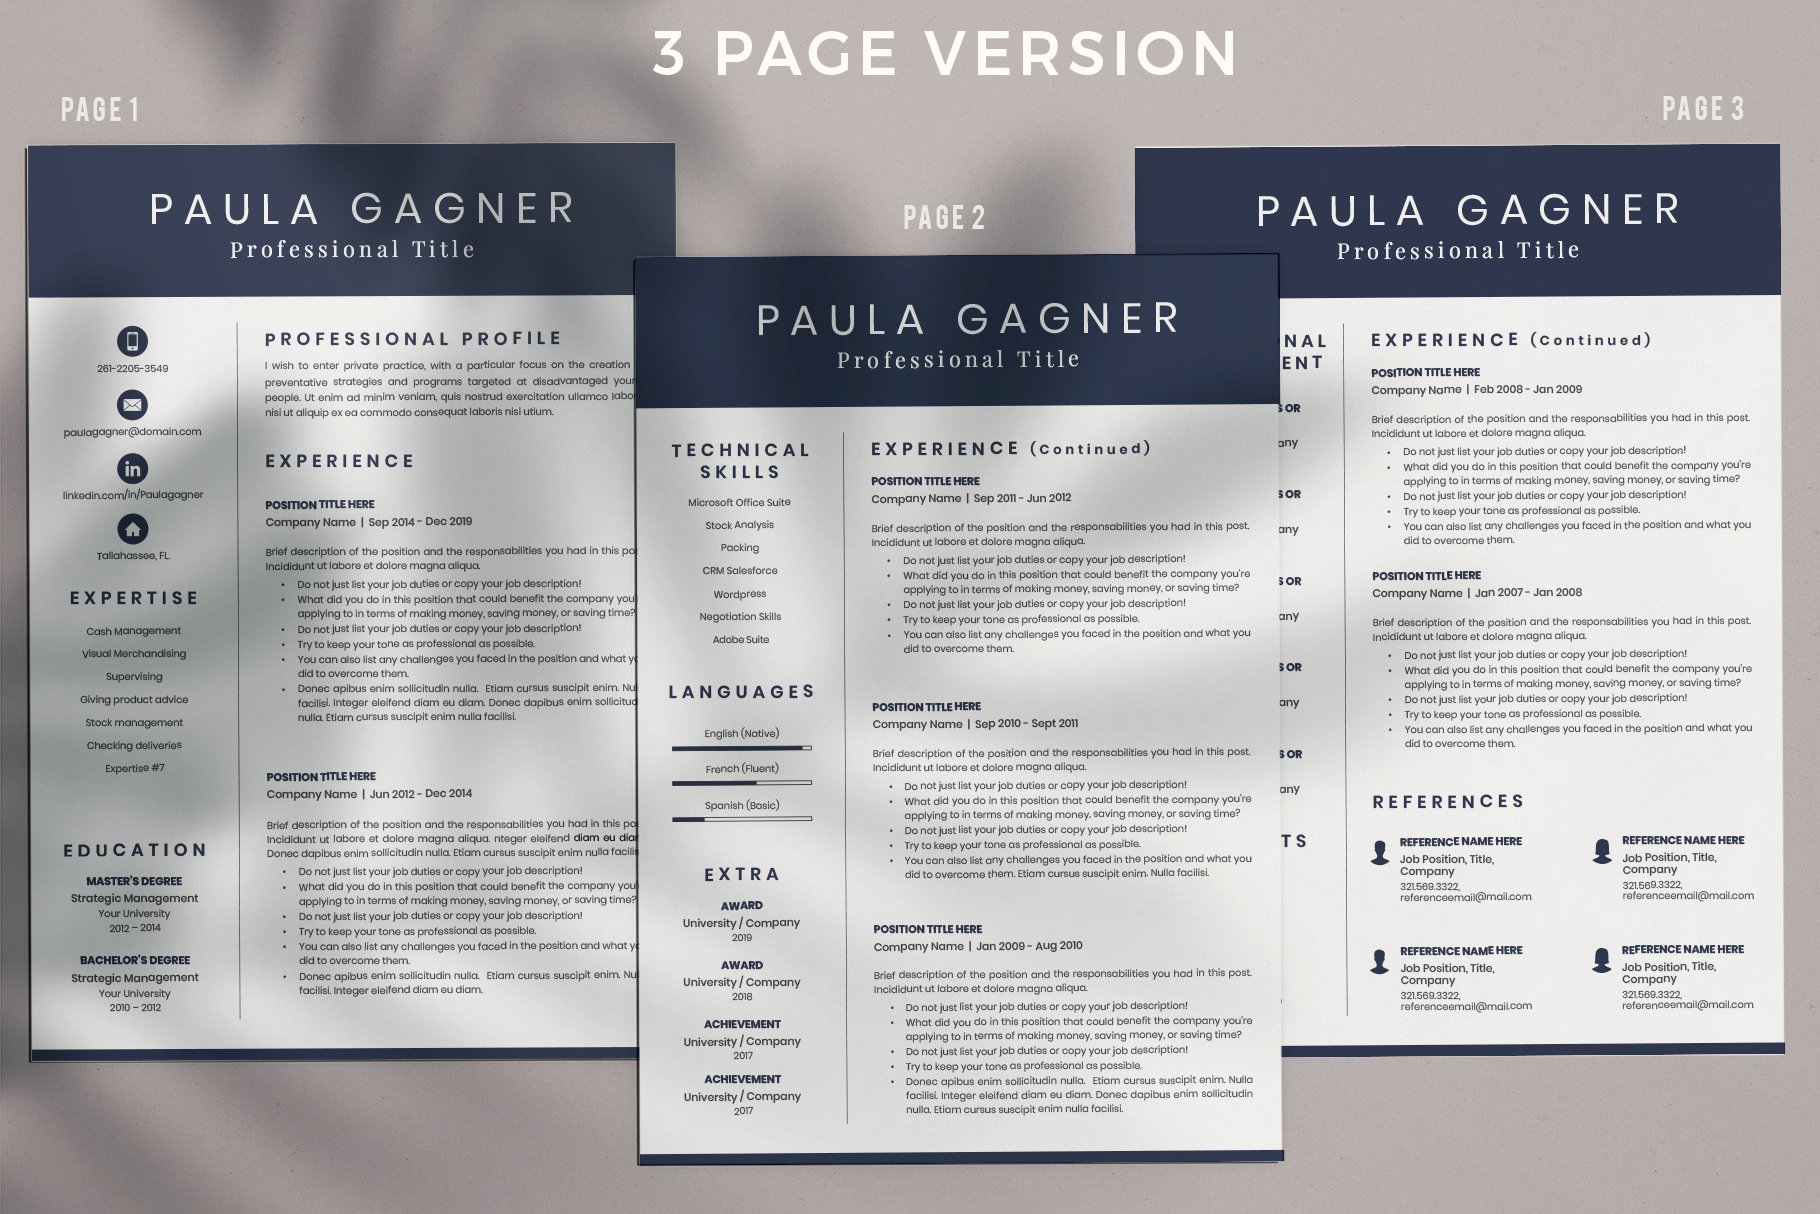 Three pages of a professional resume template.